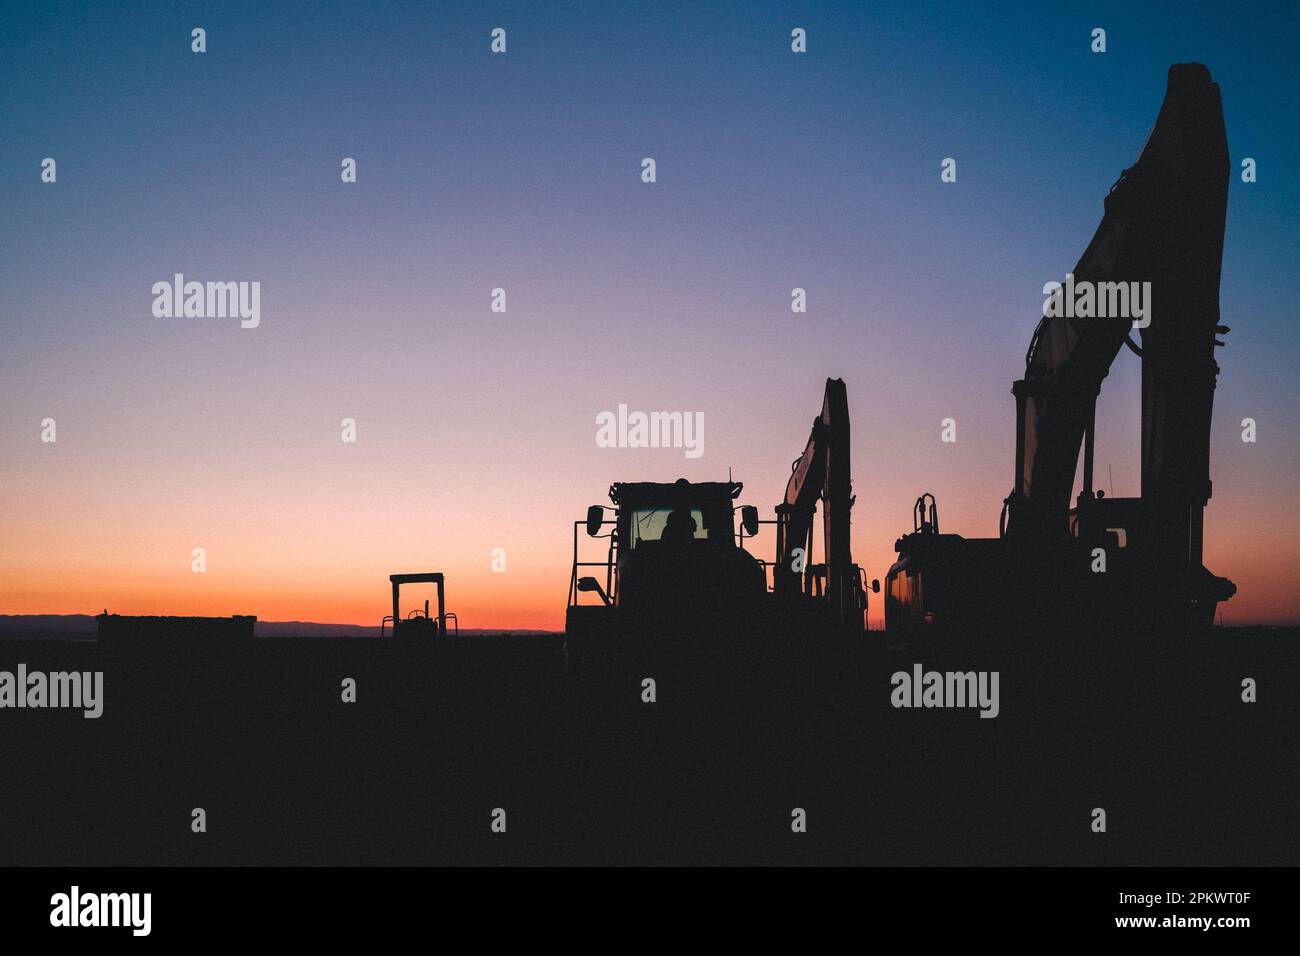 The silhouettes of two industrial machines standing in a field at dusk, illuminated by the setting sun. Stock Photo